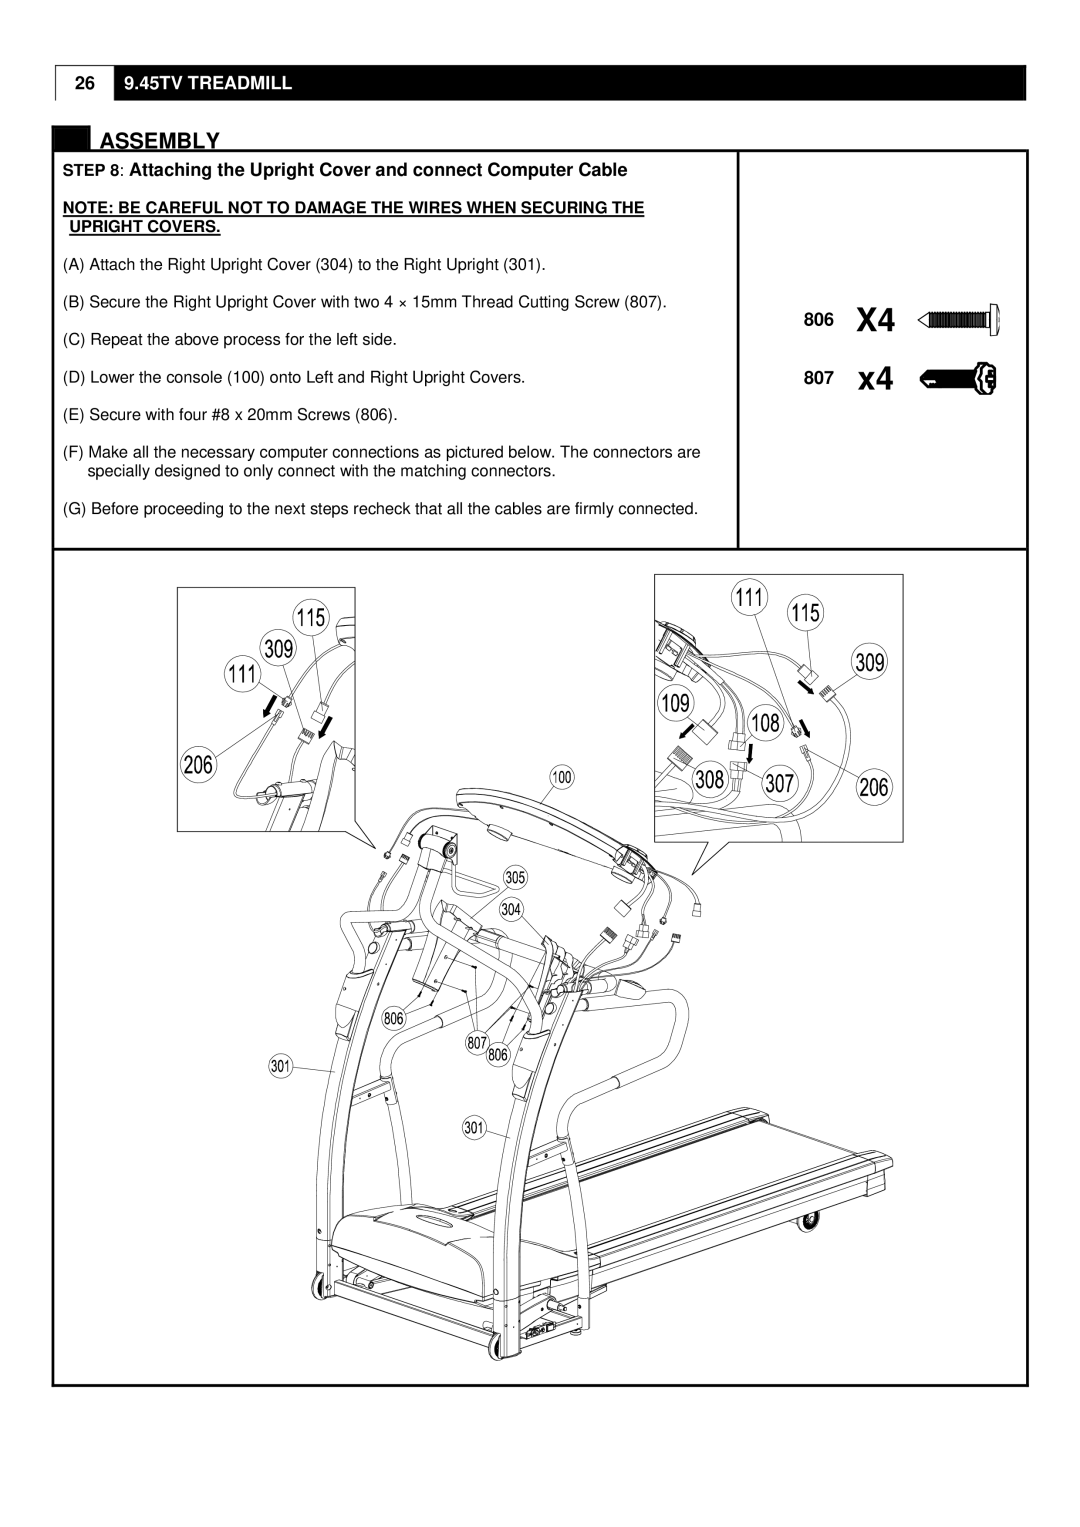 Smooth Fitness 9.45TV user manual 806 807, Attaching the Upright Cover and connect Computer Cable 